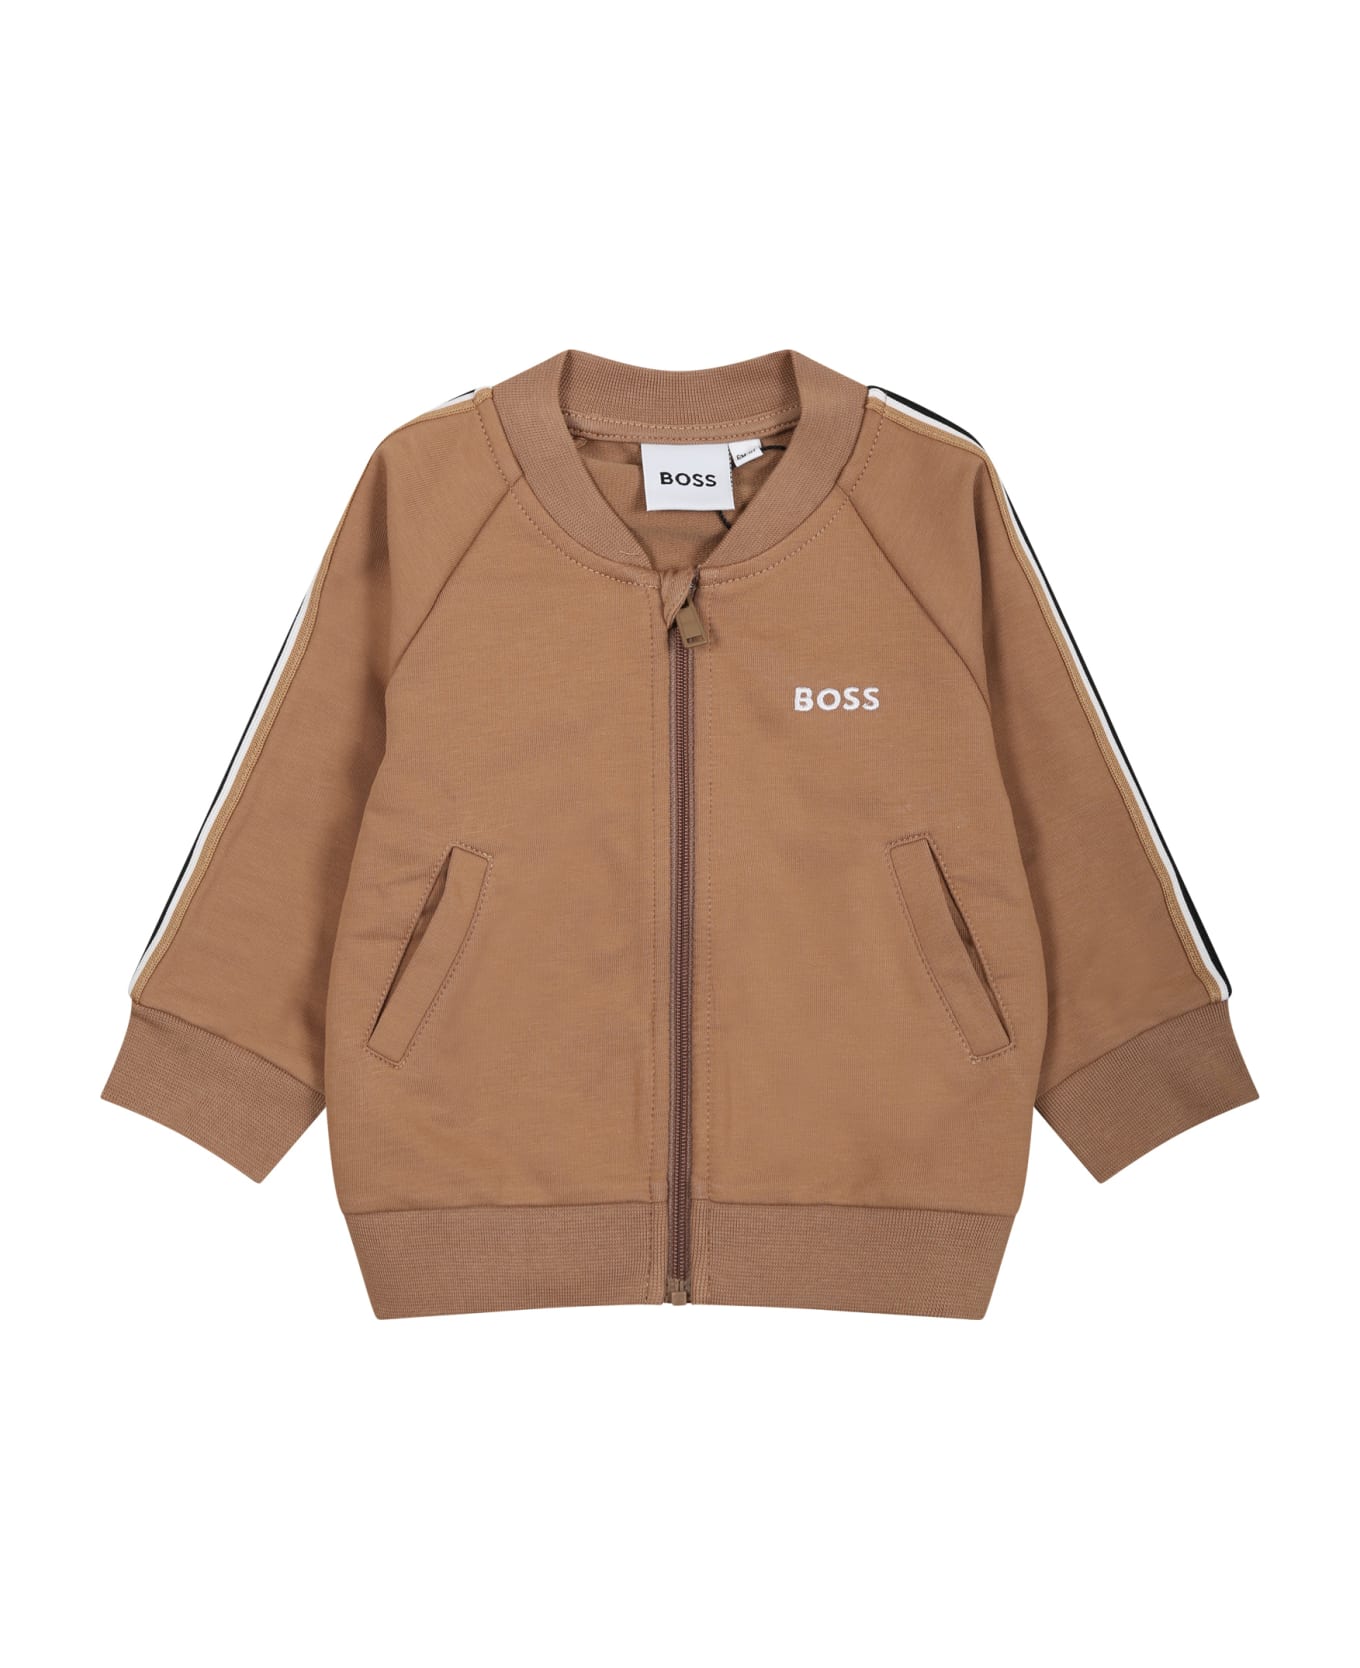 Hugo Boss Multicolor Outfit For Baby Boy With Logo - Brown